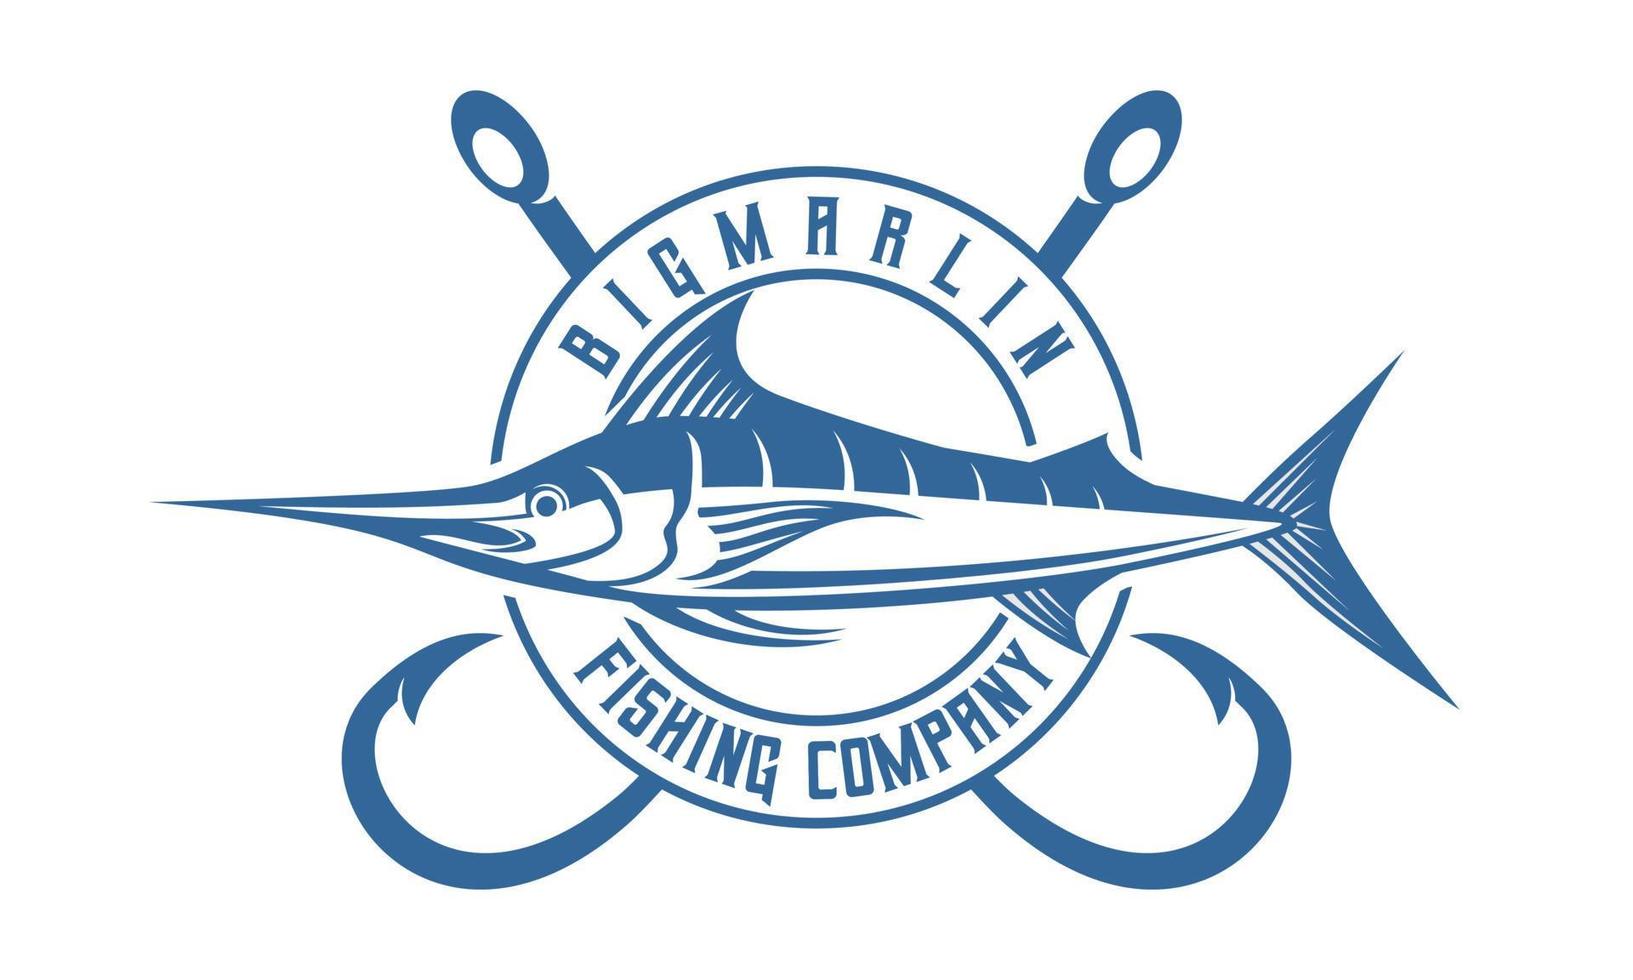 Marlin fish fishing logo design vintage template vector illustration, great for team, brand, and other template design